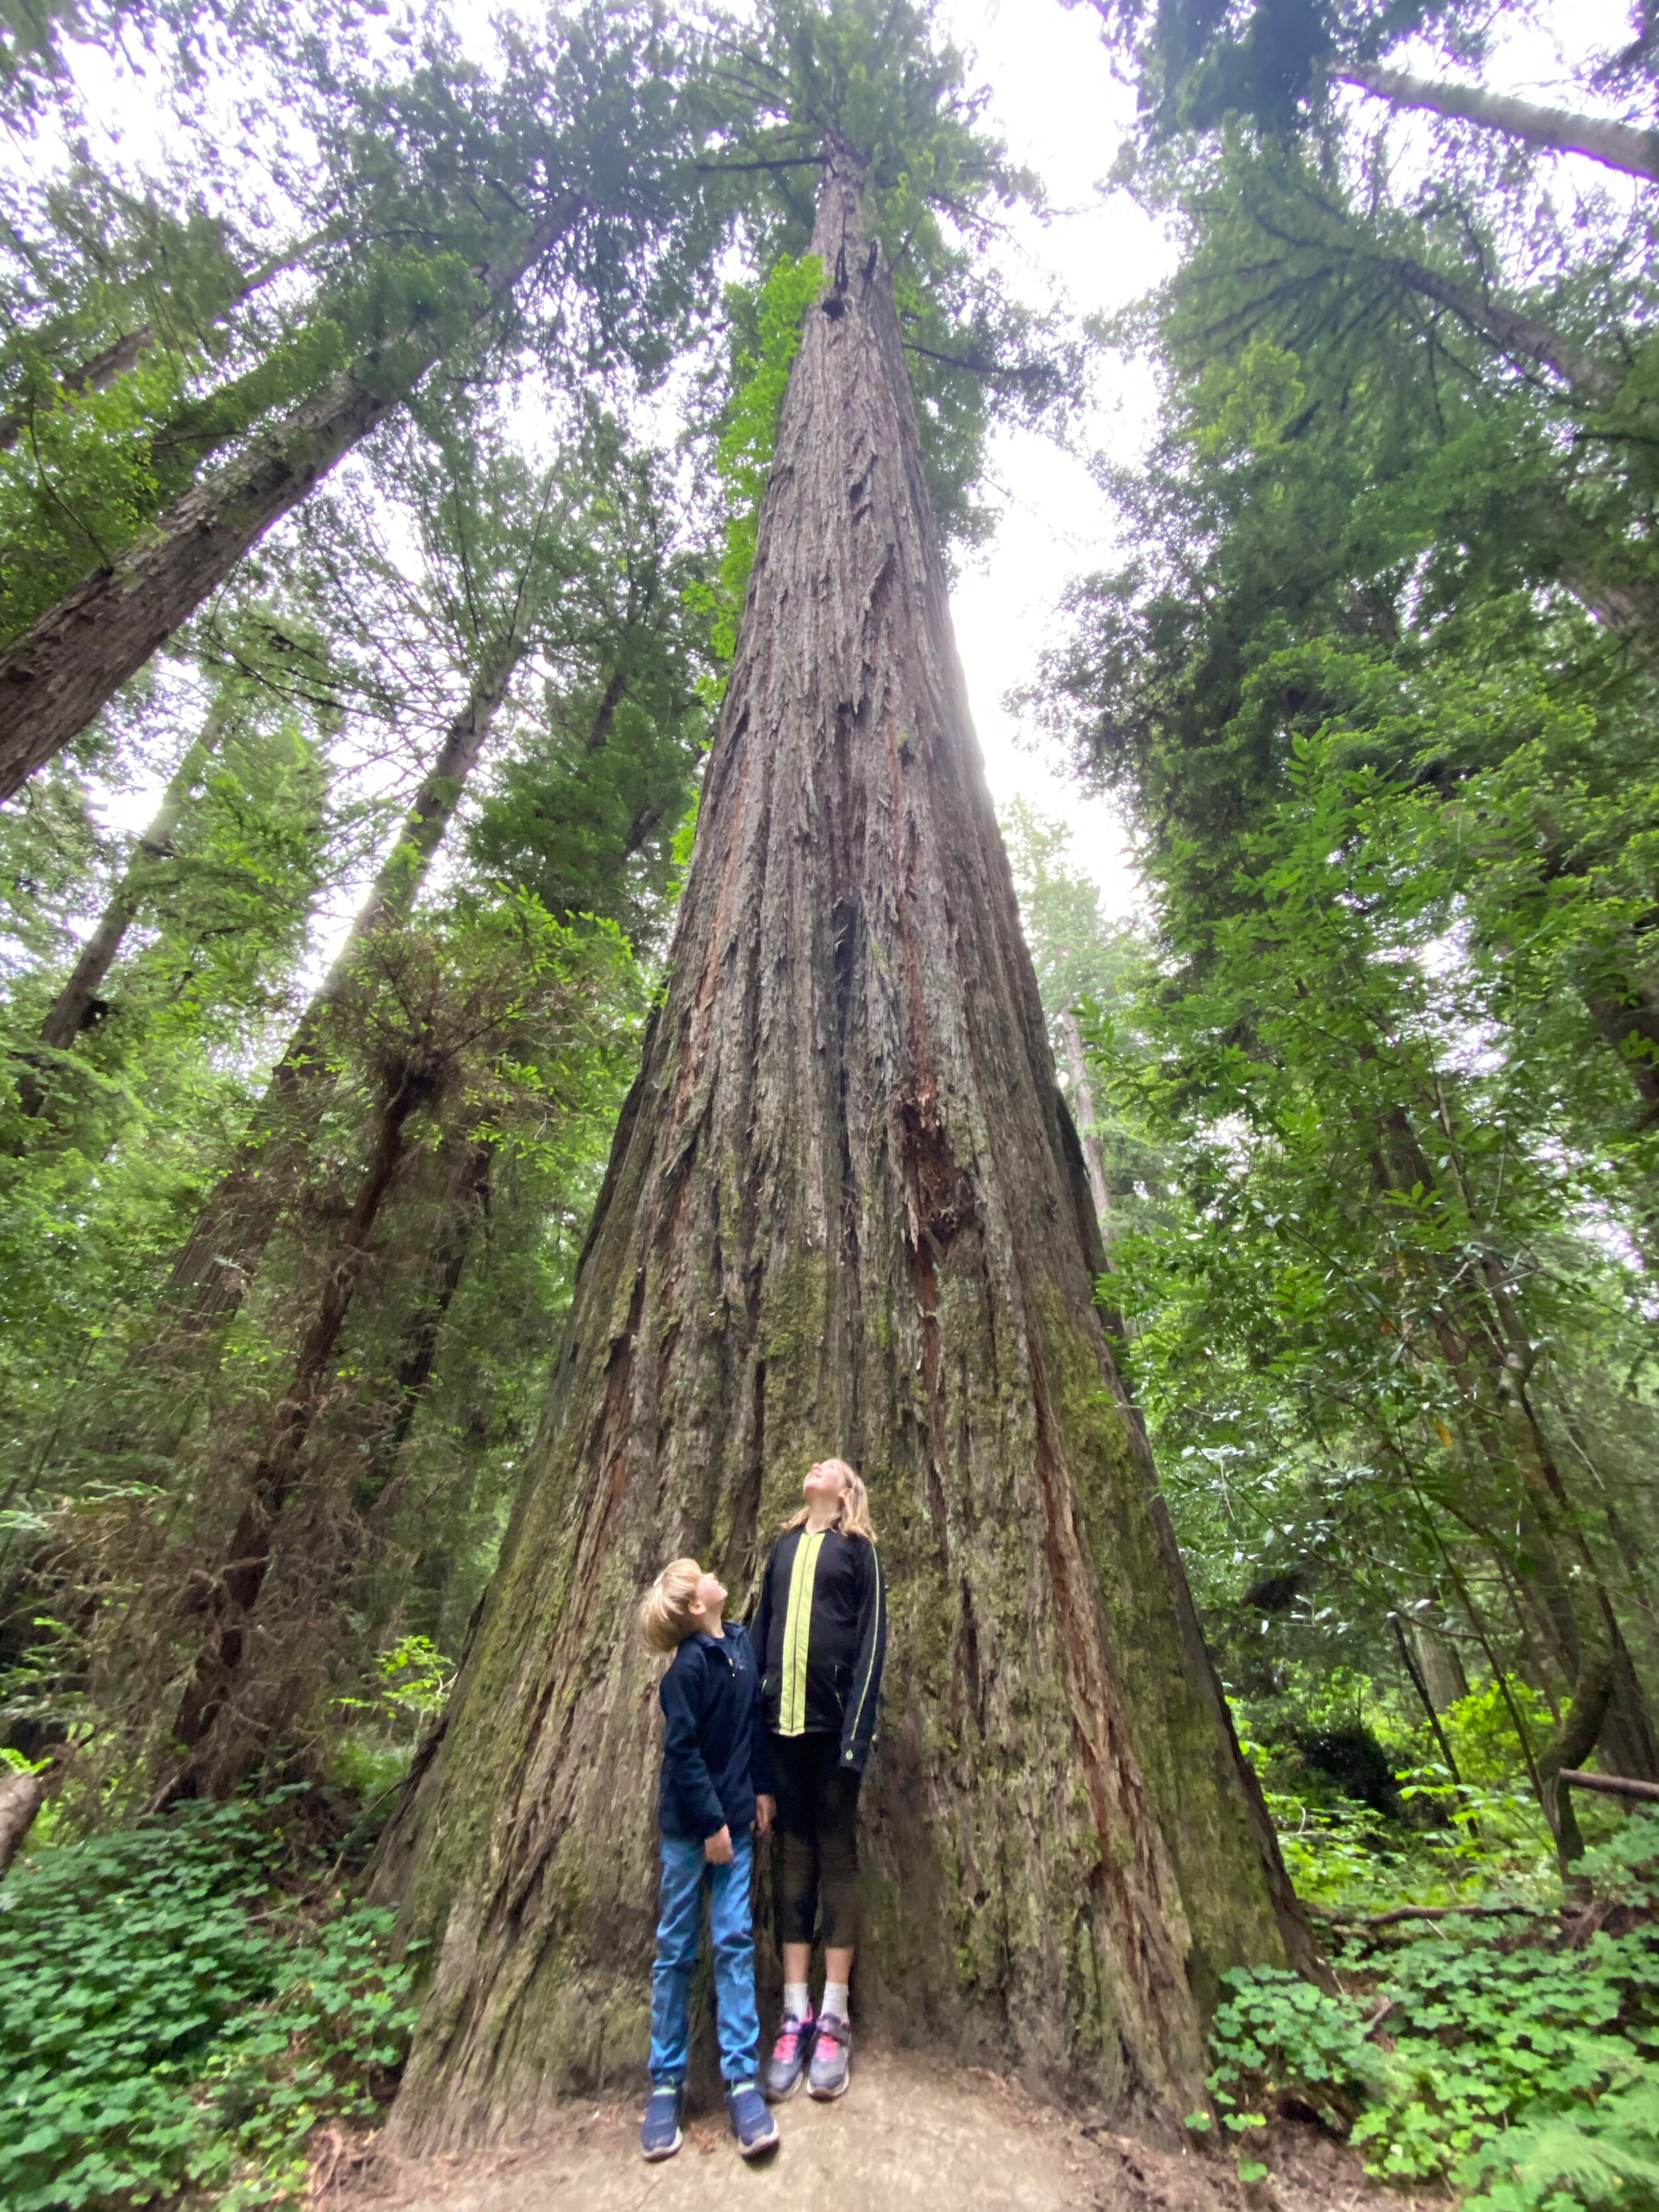 The kids are impressed with not being able to see to the top of these trees!  Photo by Karen Boudreaux, June 11, 2021